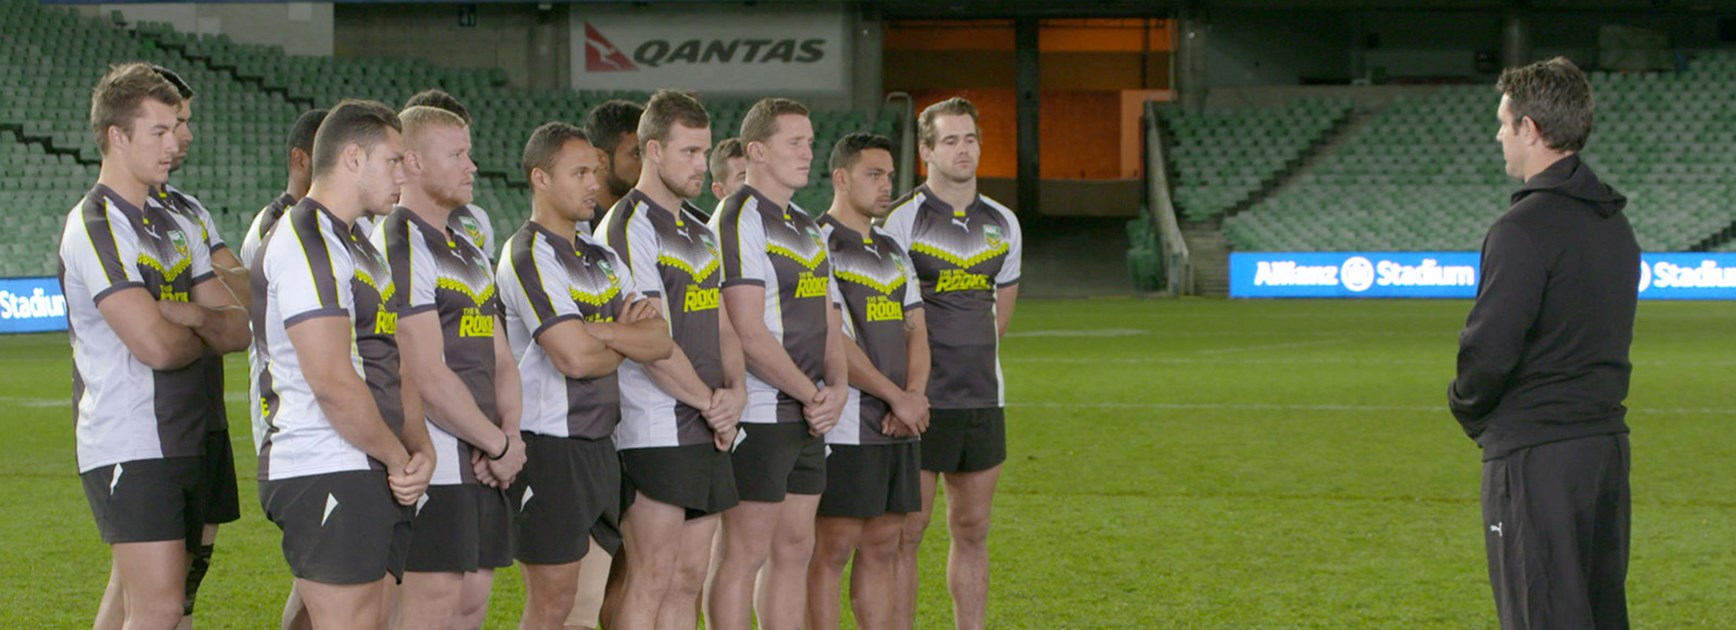 The NRL Rookies face the first cut of the series in Episode 2.